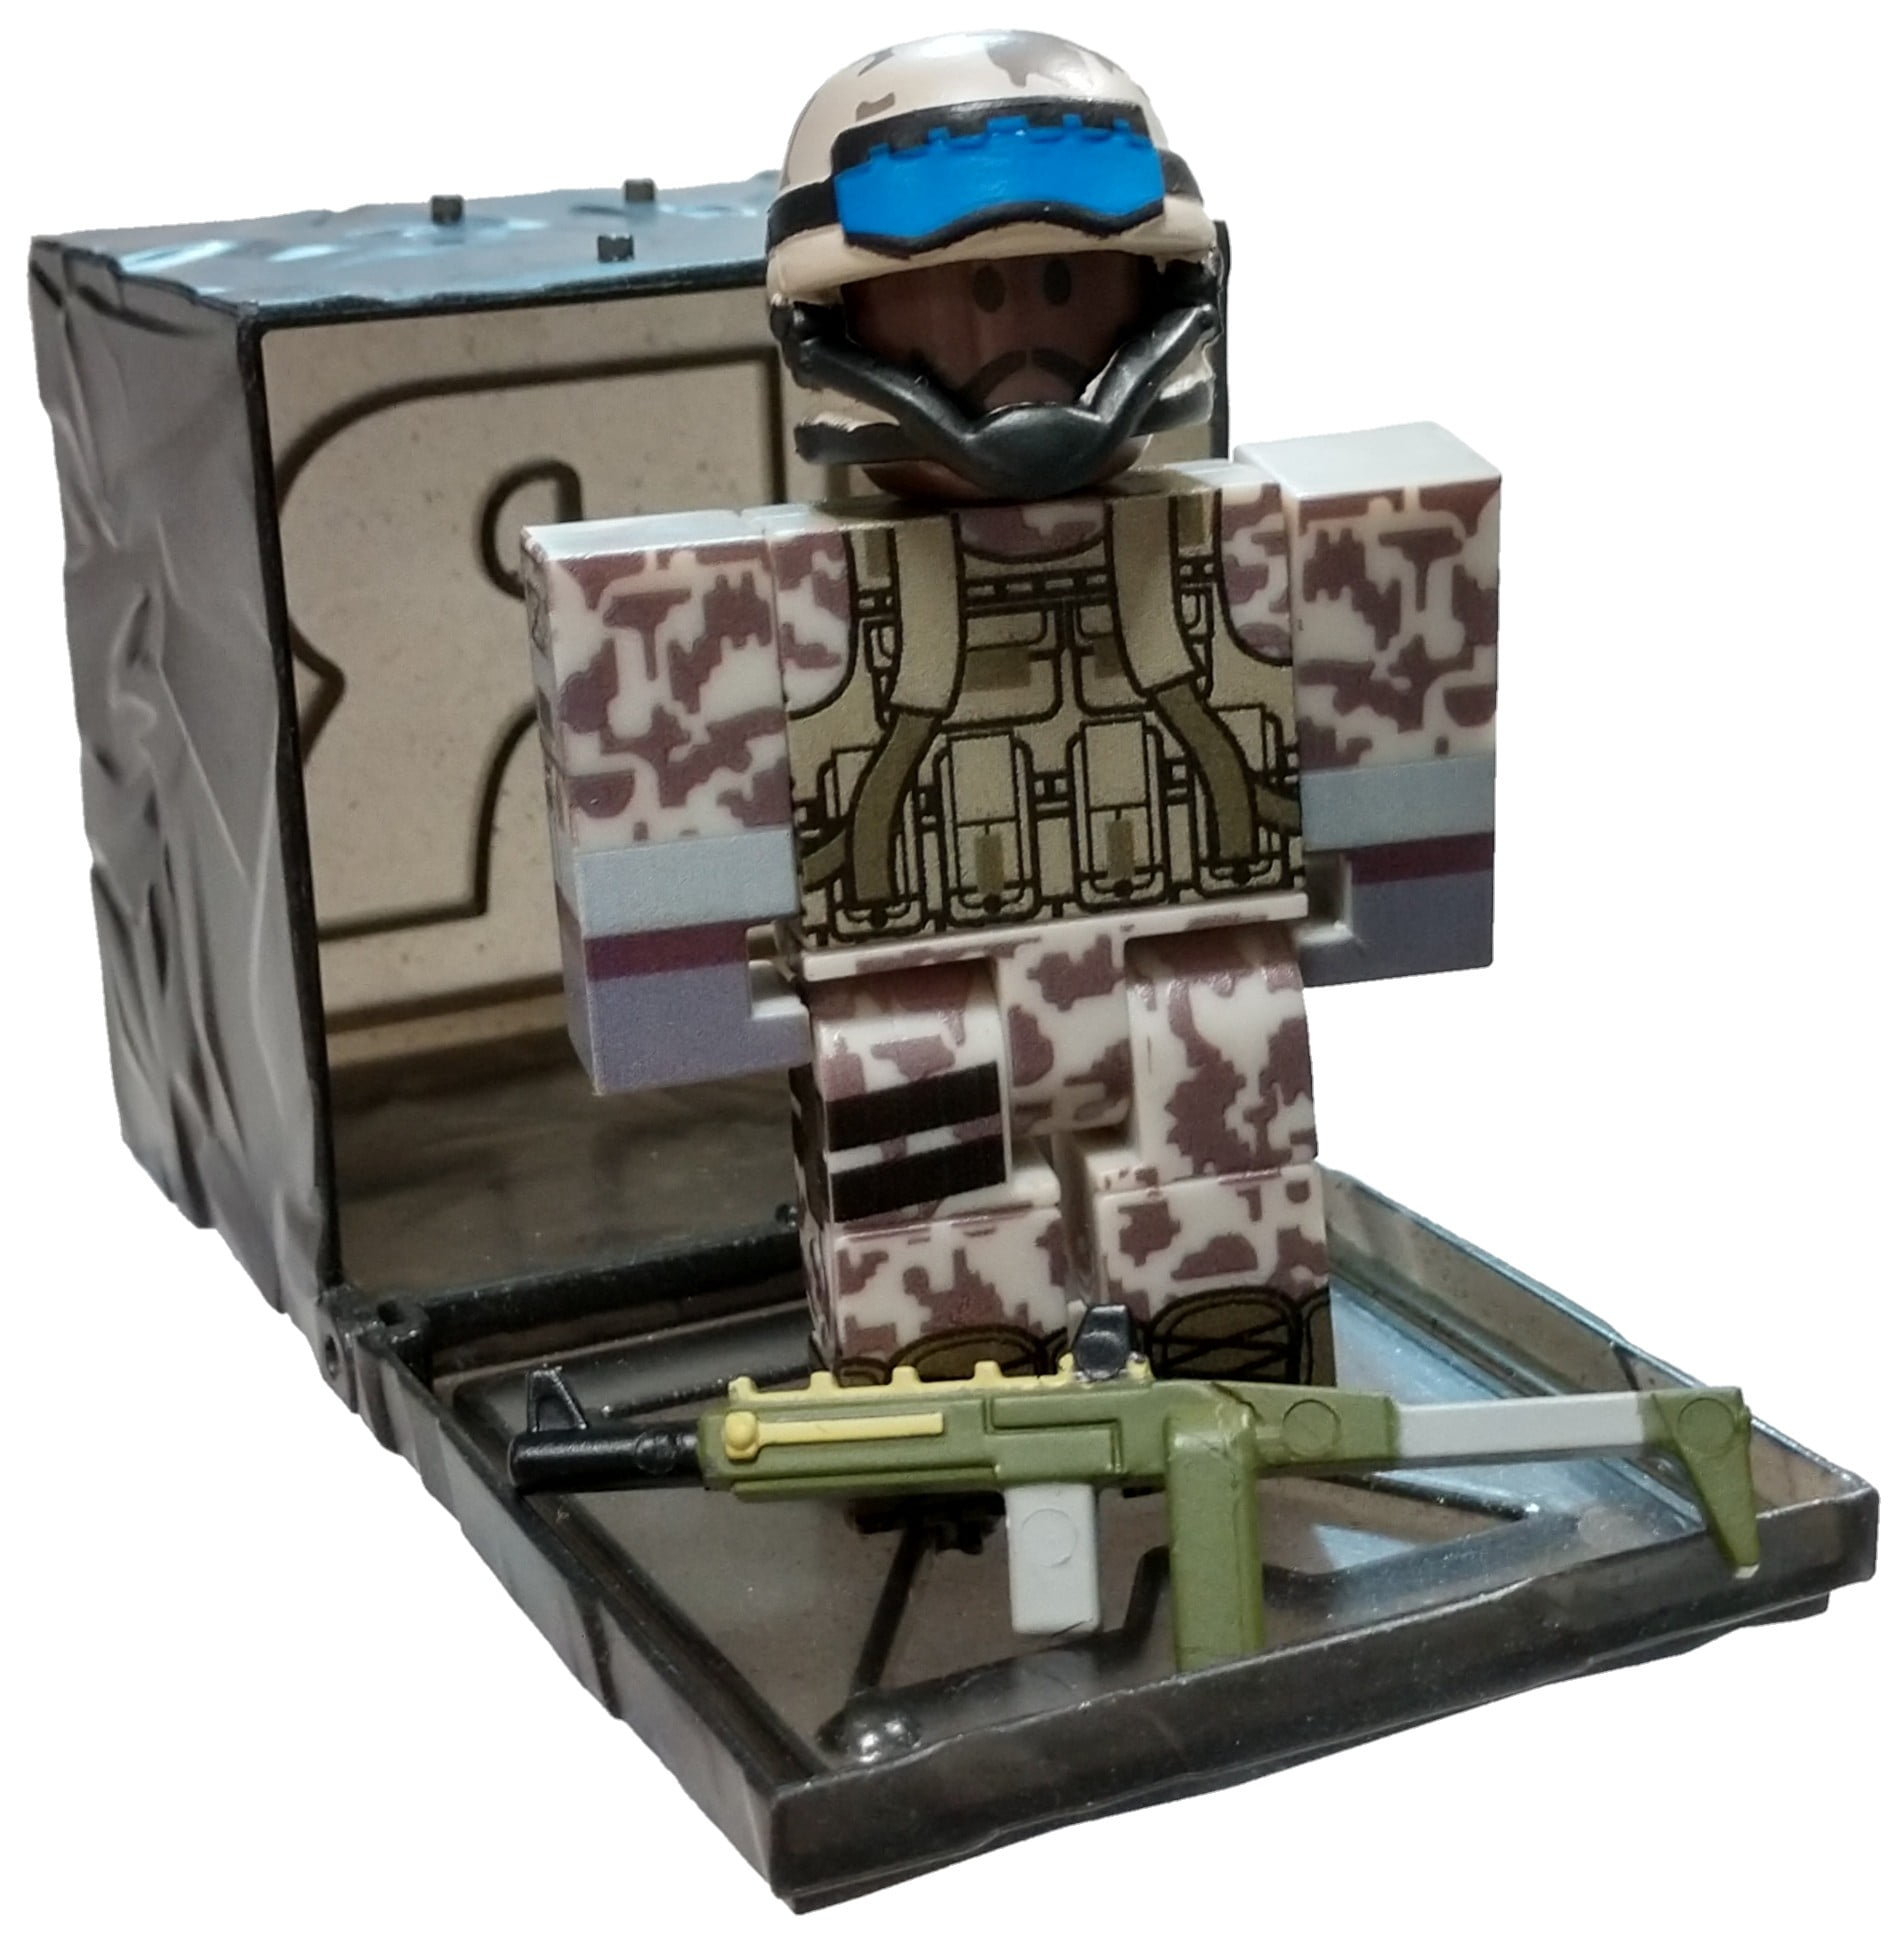 Roblox Series 7 After The Flash Uscpf Soldier Mini Figure With Black Cube And Online Code No Packaging Walmart Com Walmart Com - roblox military girl